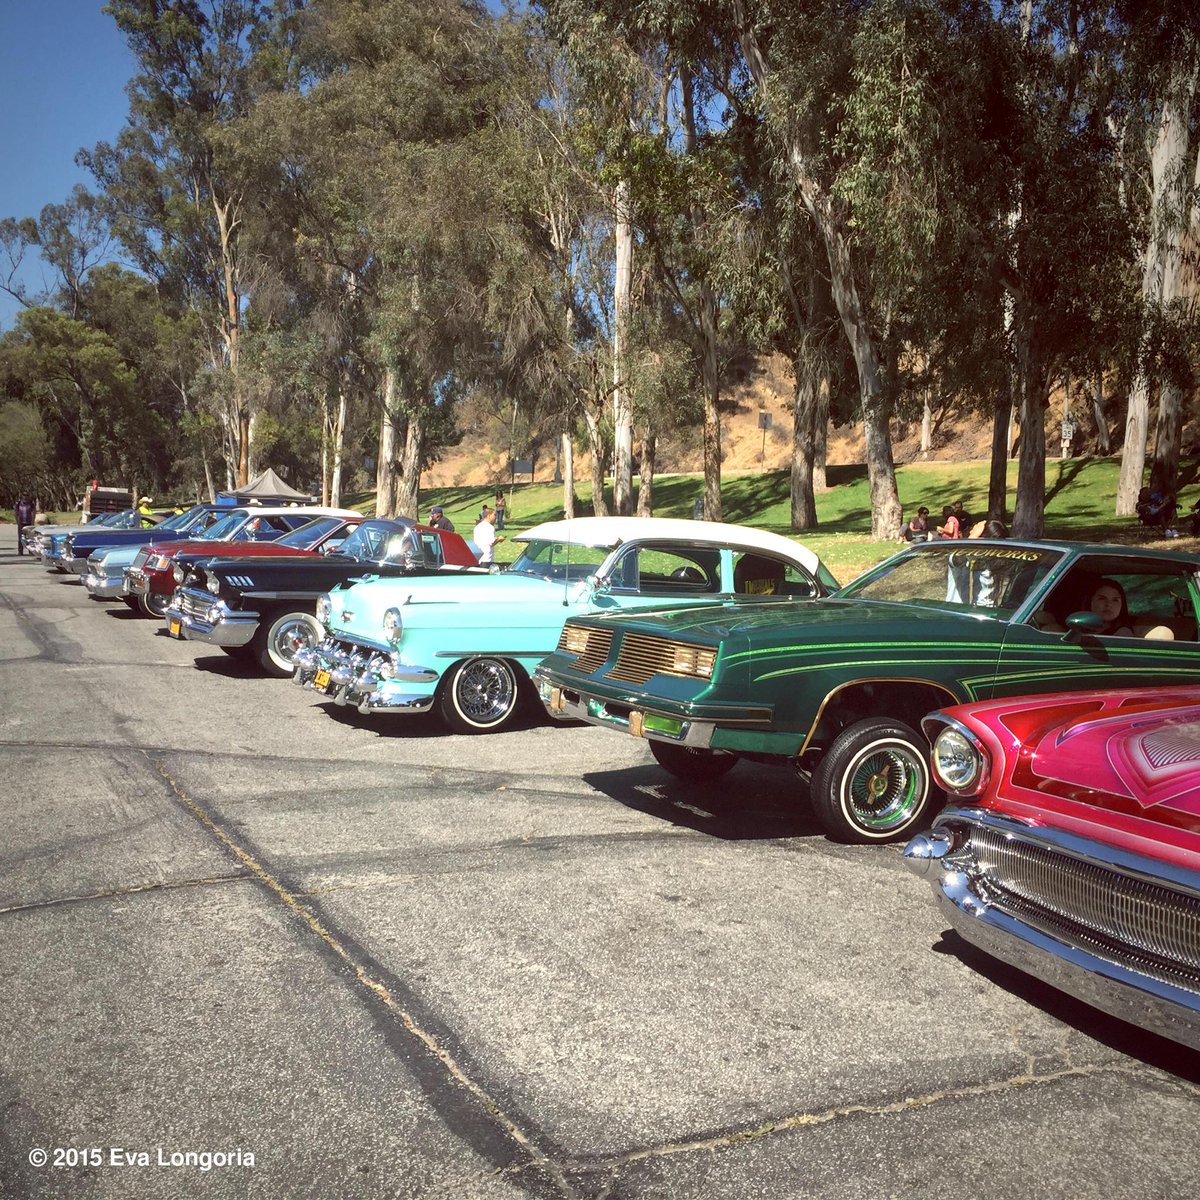 Wow amazing day today filming with over 18 Lowrider clubs! Gorgeous cars! #LatinoPride #FamilyFirst http://t.co/7FwwDEPqjJ